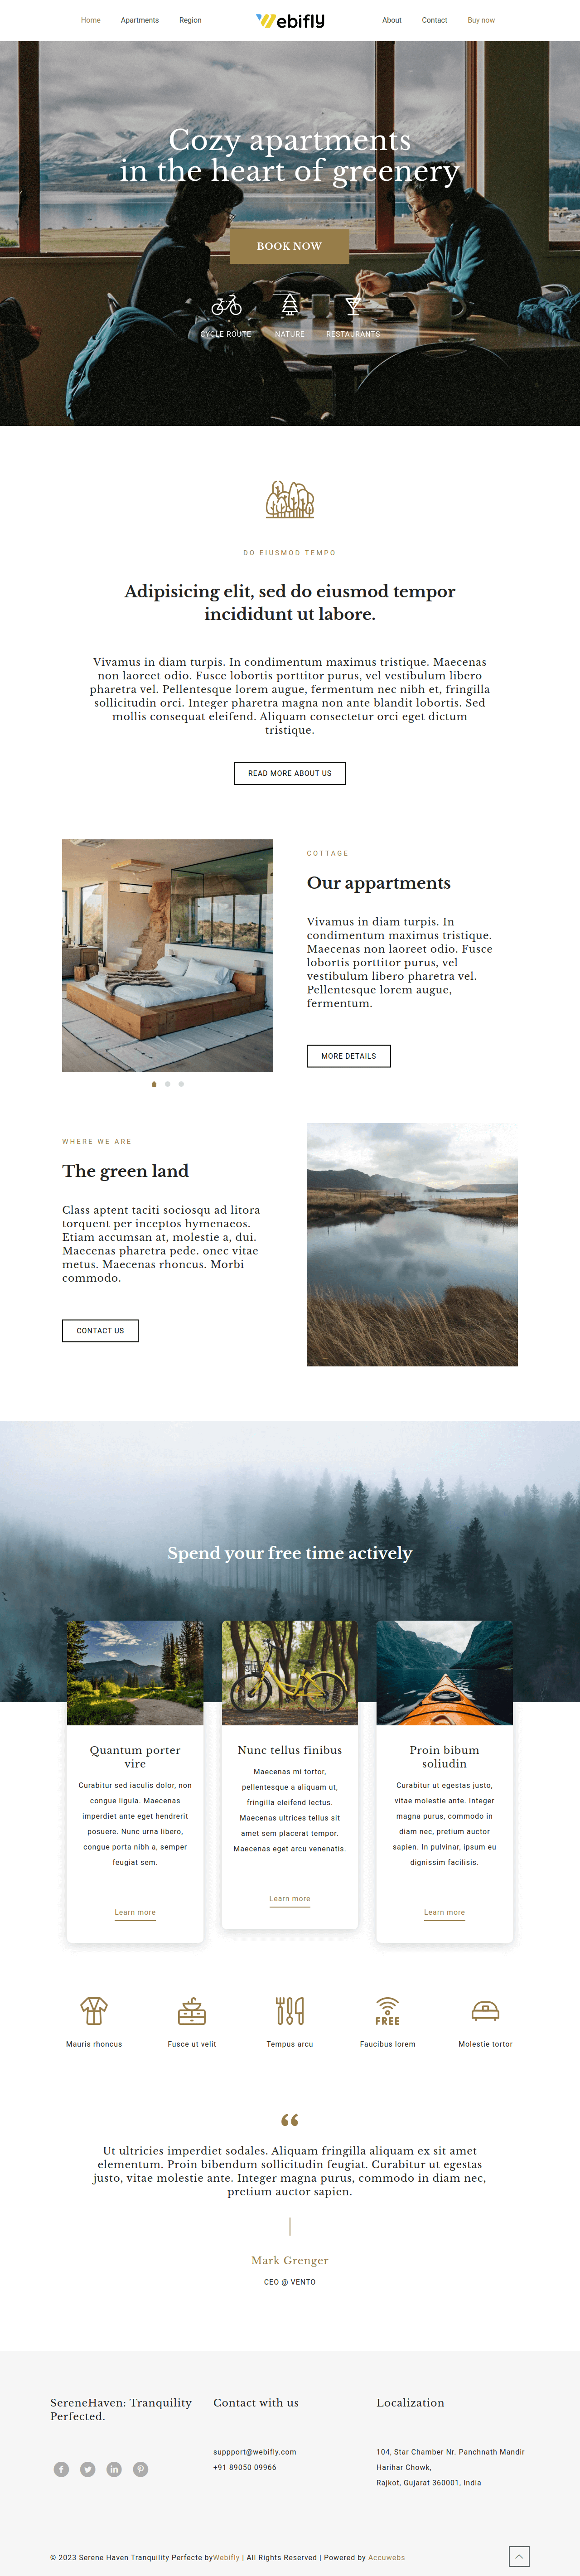 serene Haven - Hotel and Resort Template